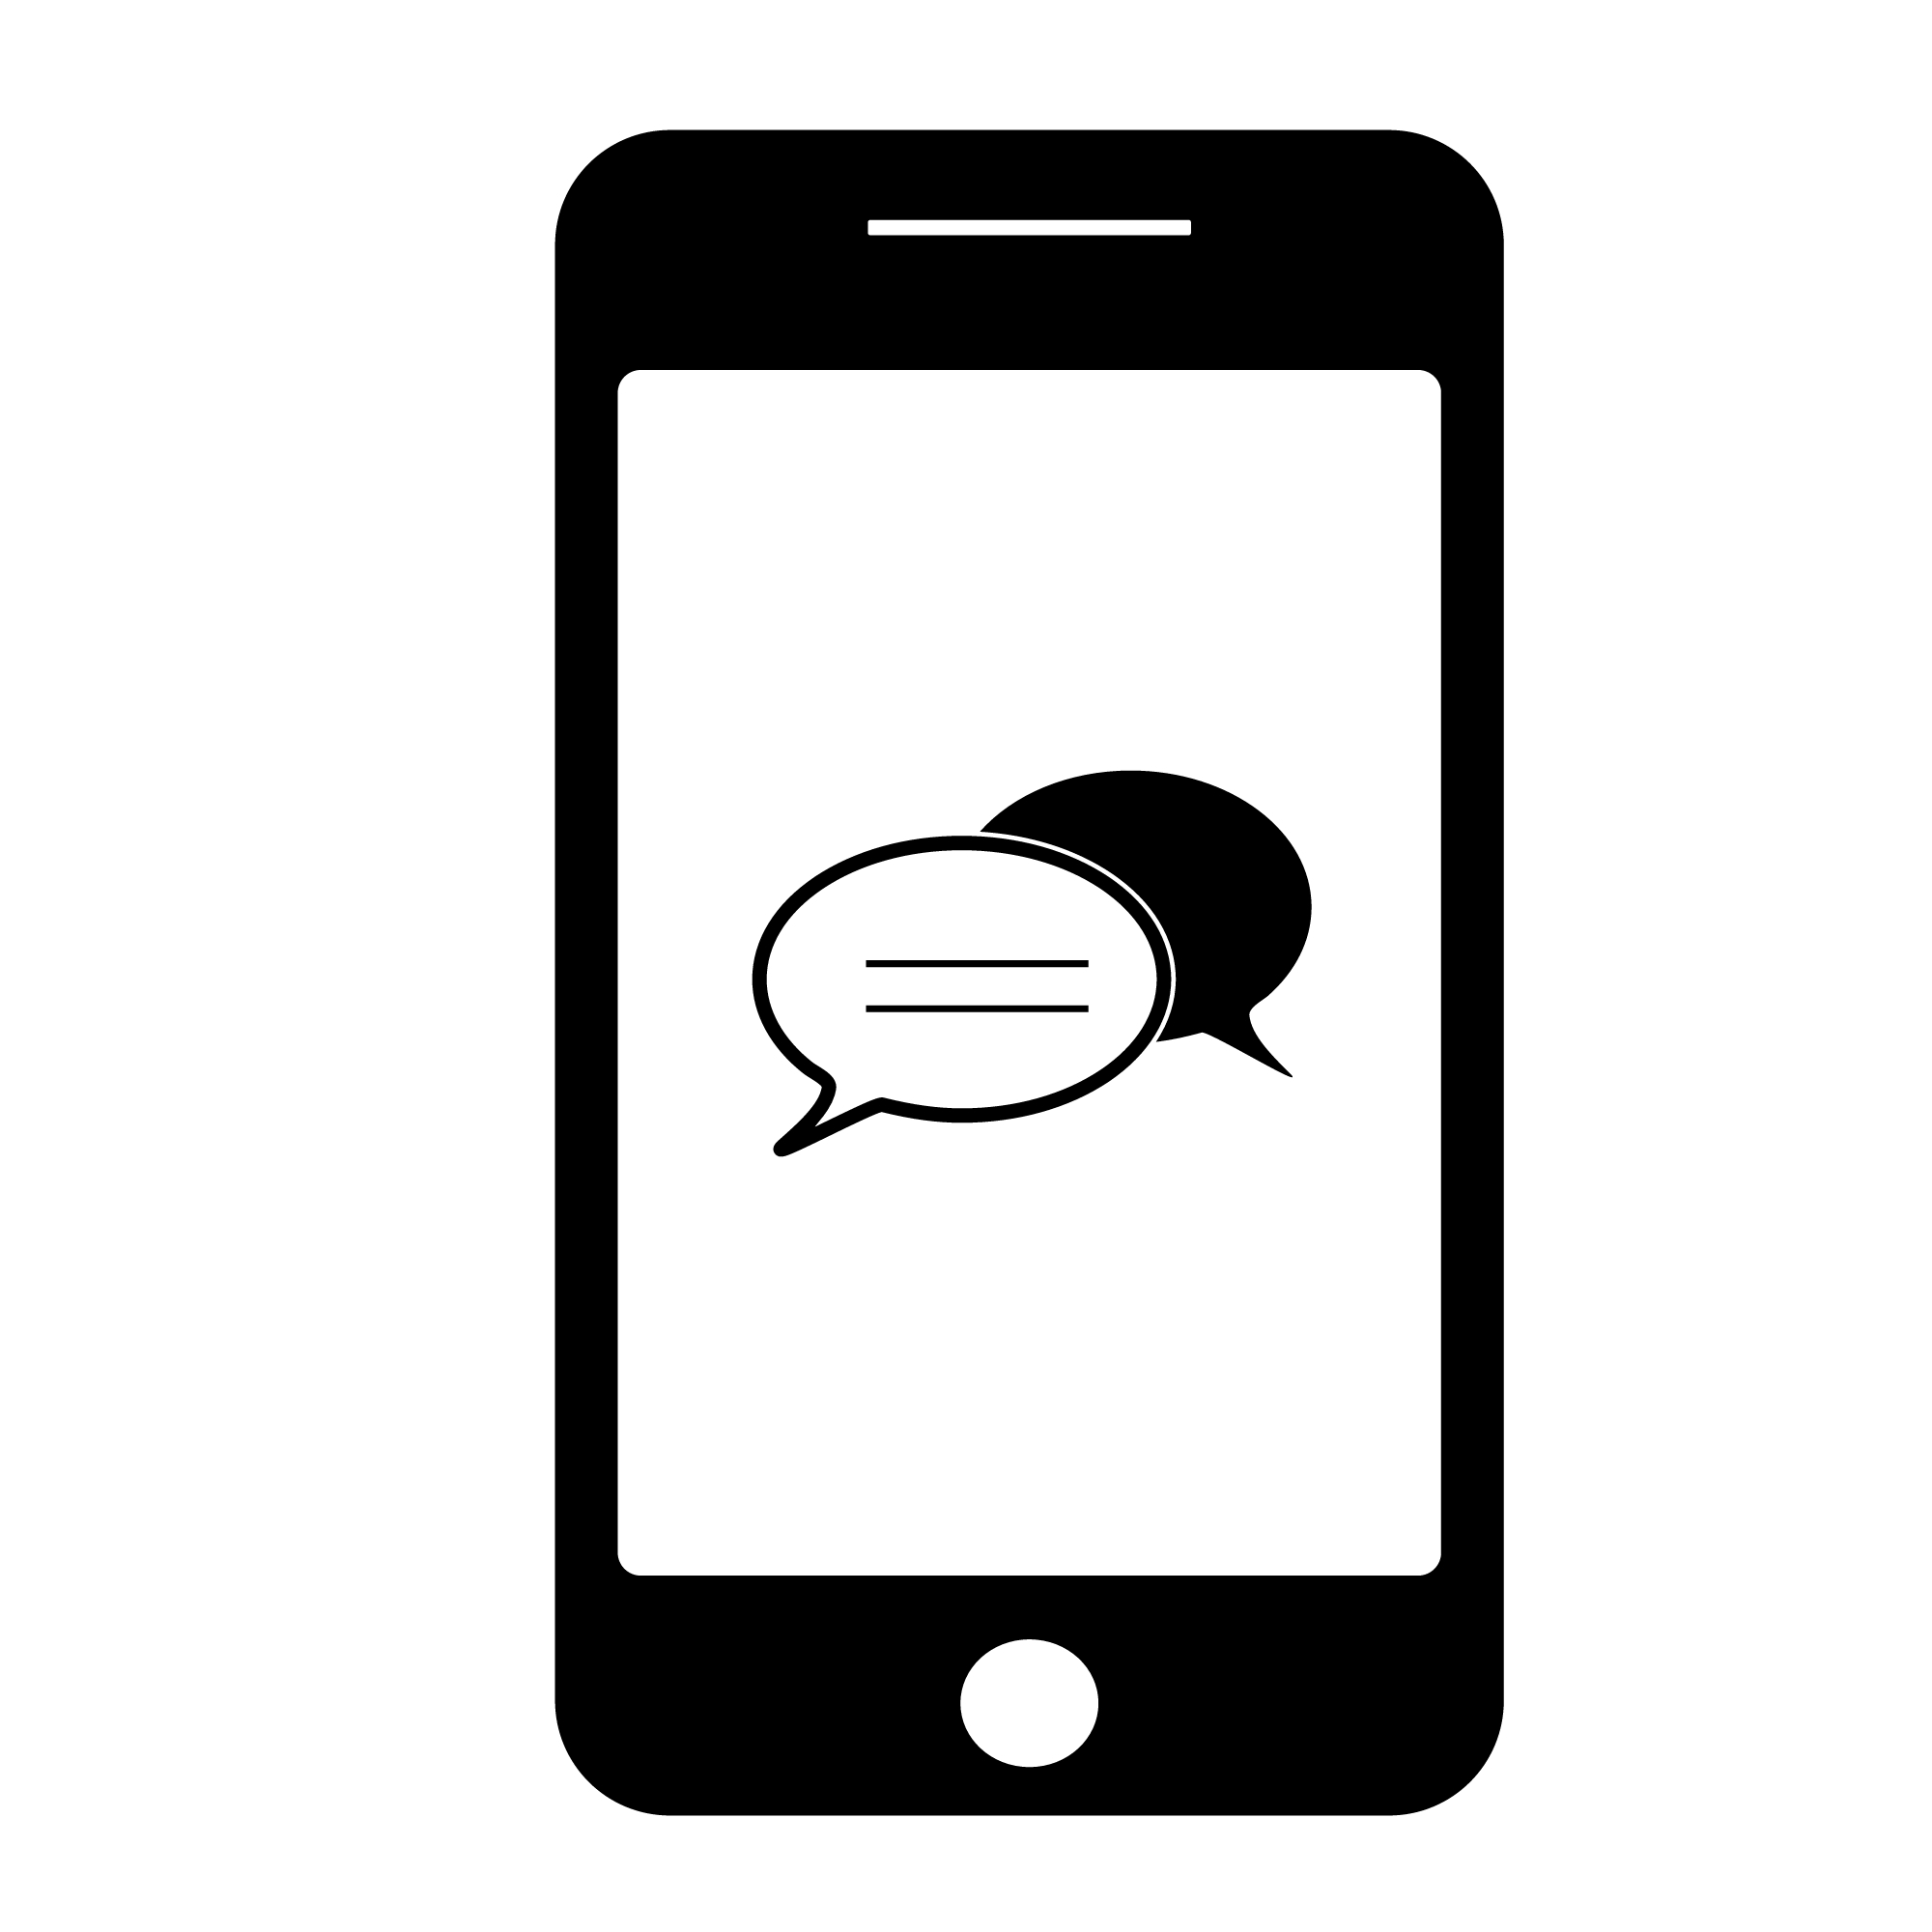 Shutterstock_1475812742 Smartphone, mobile phone smartphone device gadget. telephone icon with Speech bubble message icon communication symbol.- vector.